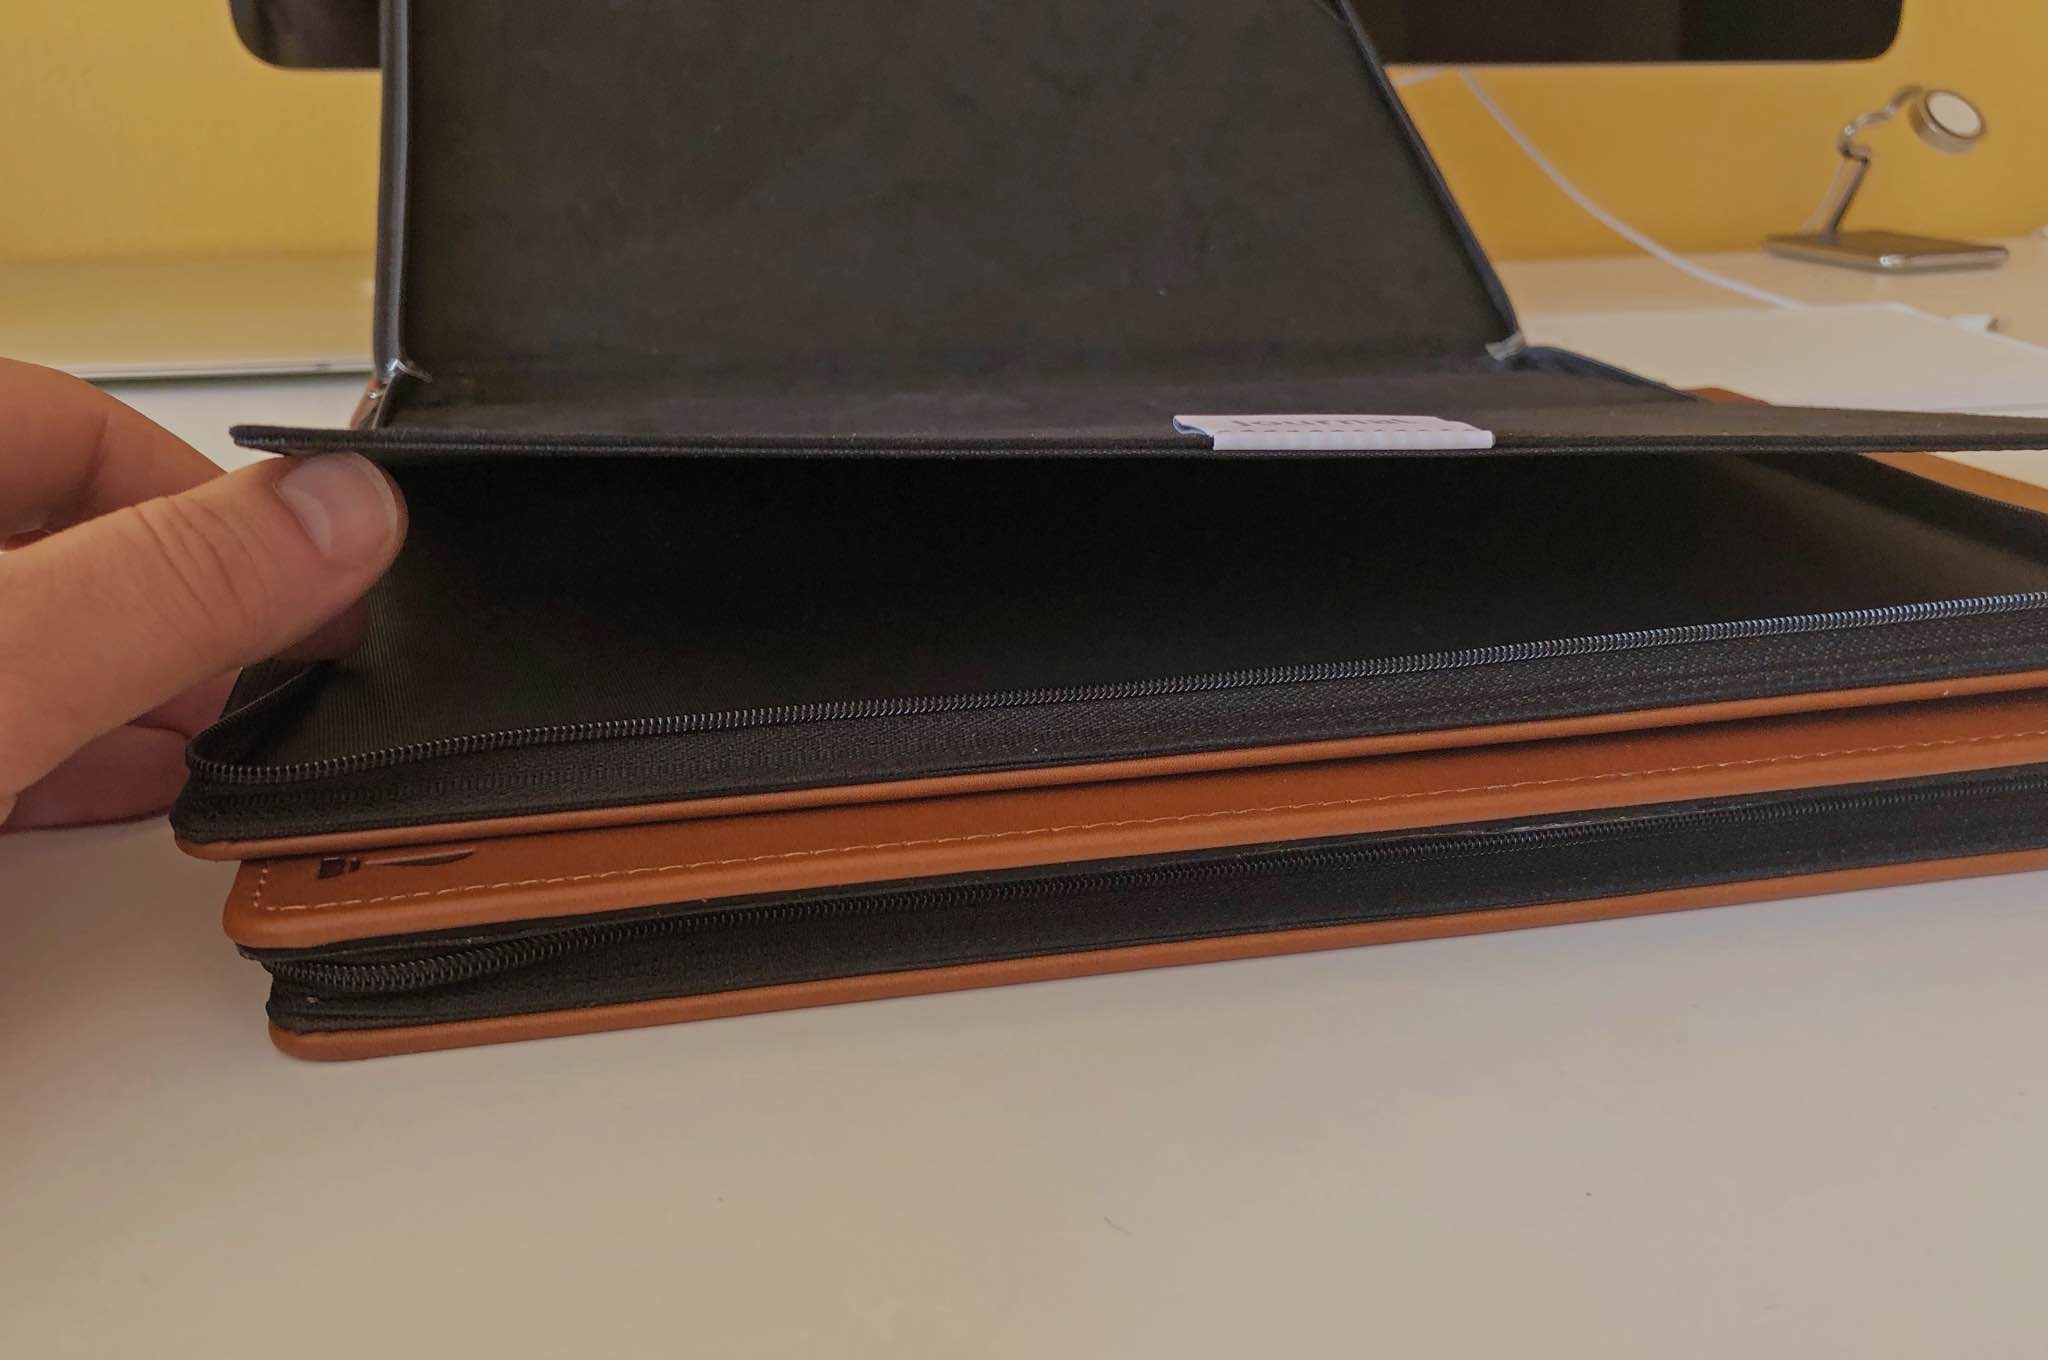 Hands-on with Twelve South's new Journal leather case for Mac 